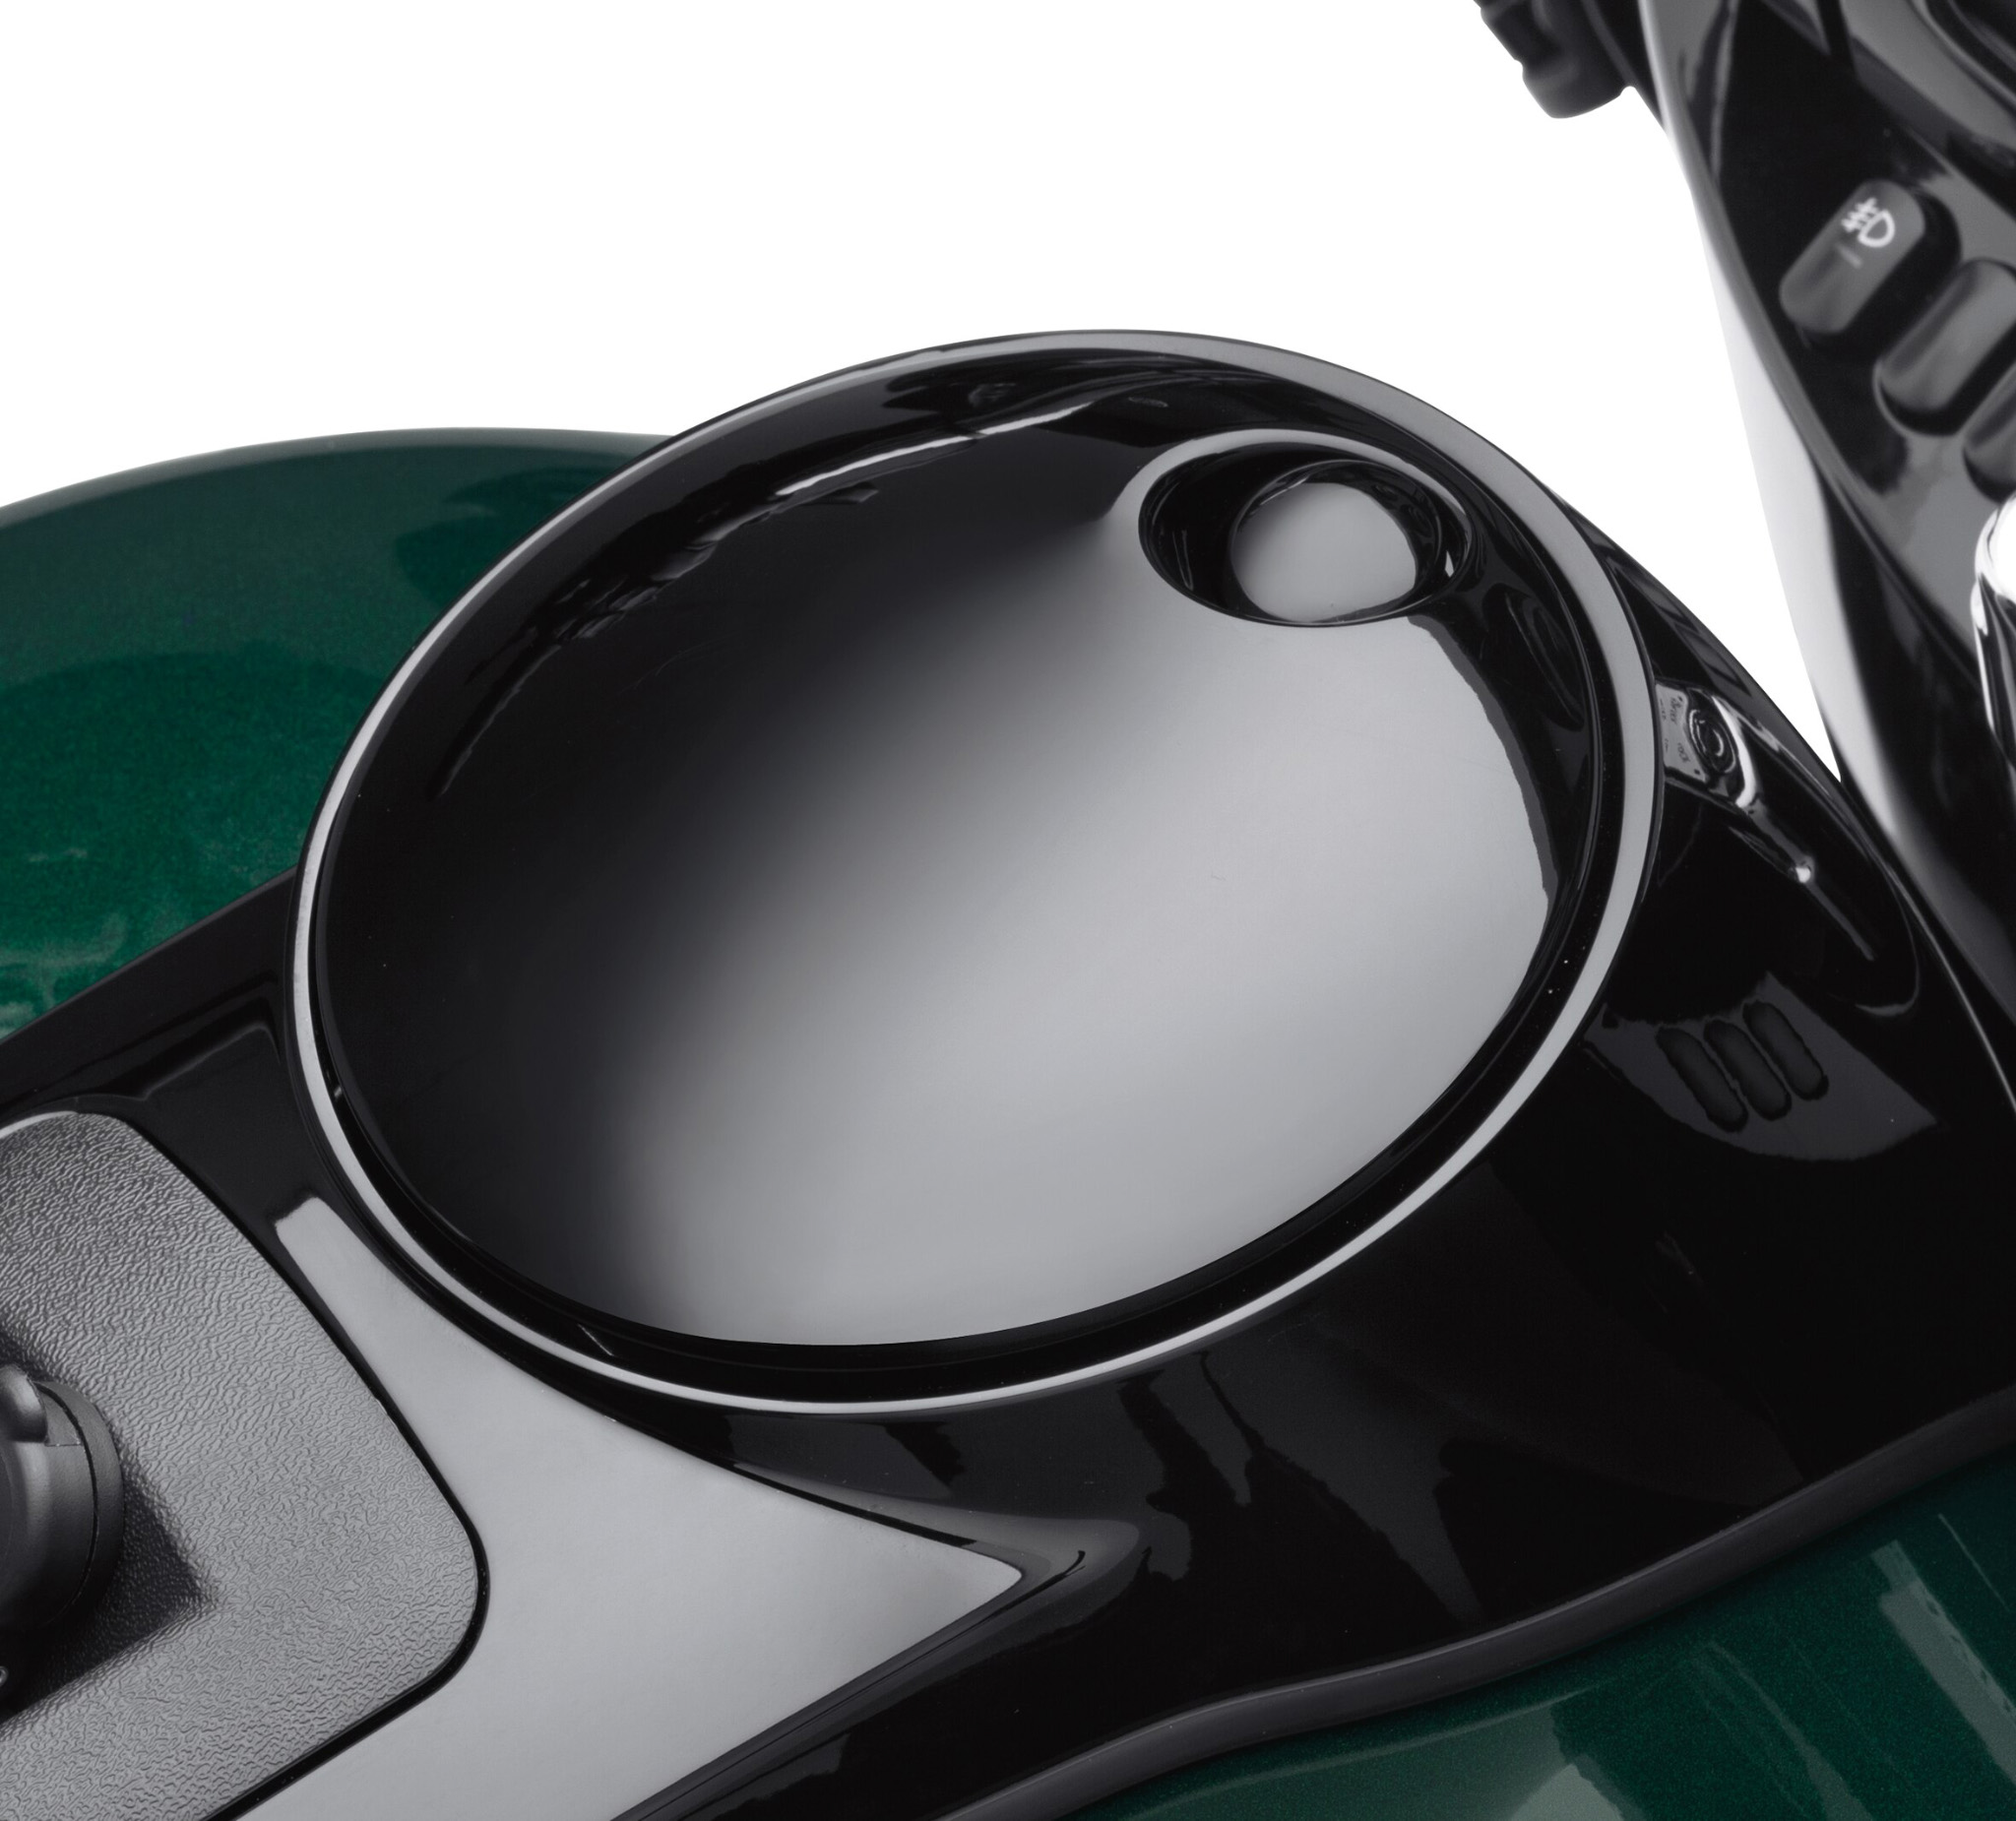 Smooth Push-Button Fuel Tank Console Door Release - Gloss Black | Harley- Davidson USA